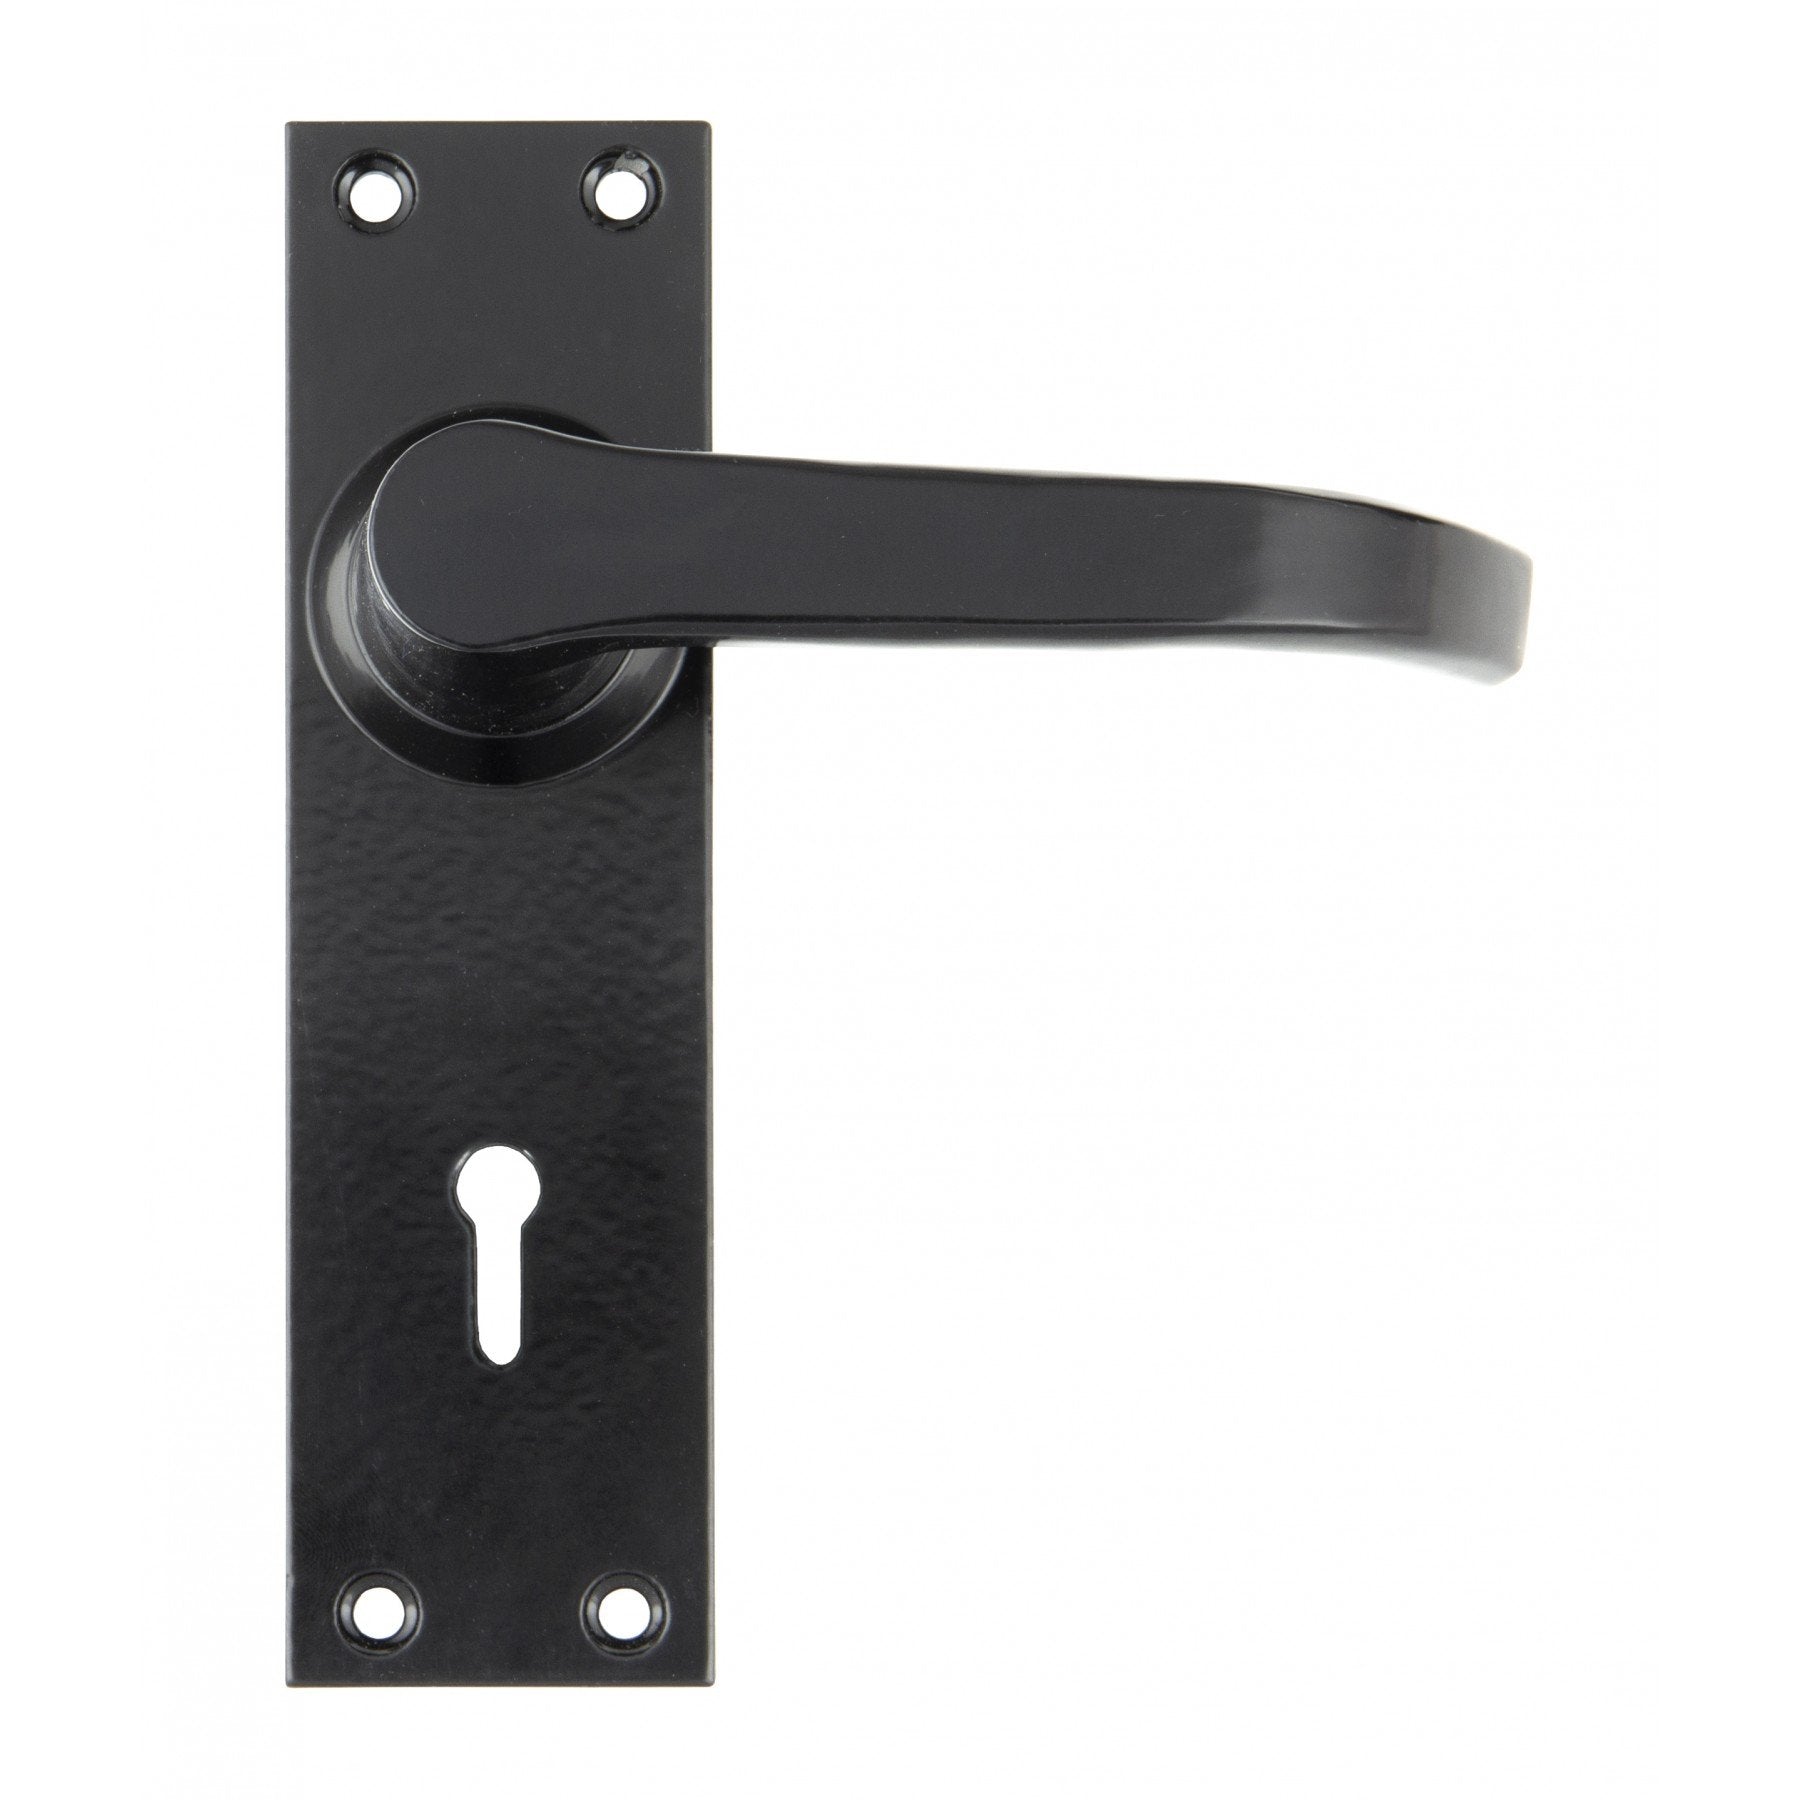 From the Anvil Black Deluxe Lever Lock Set